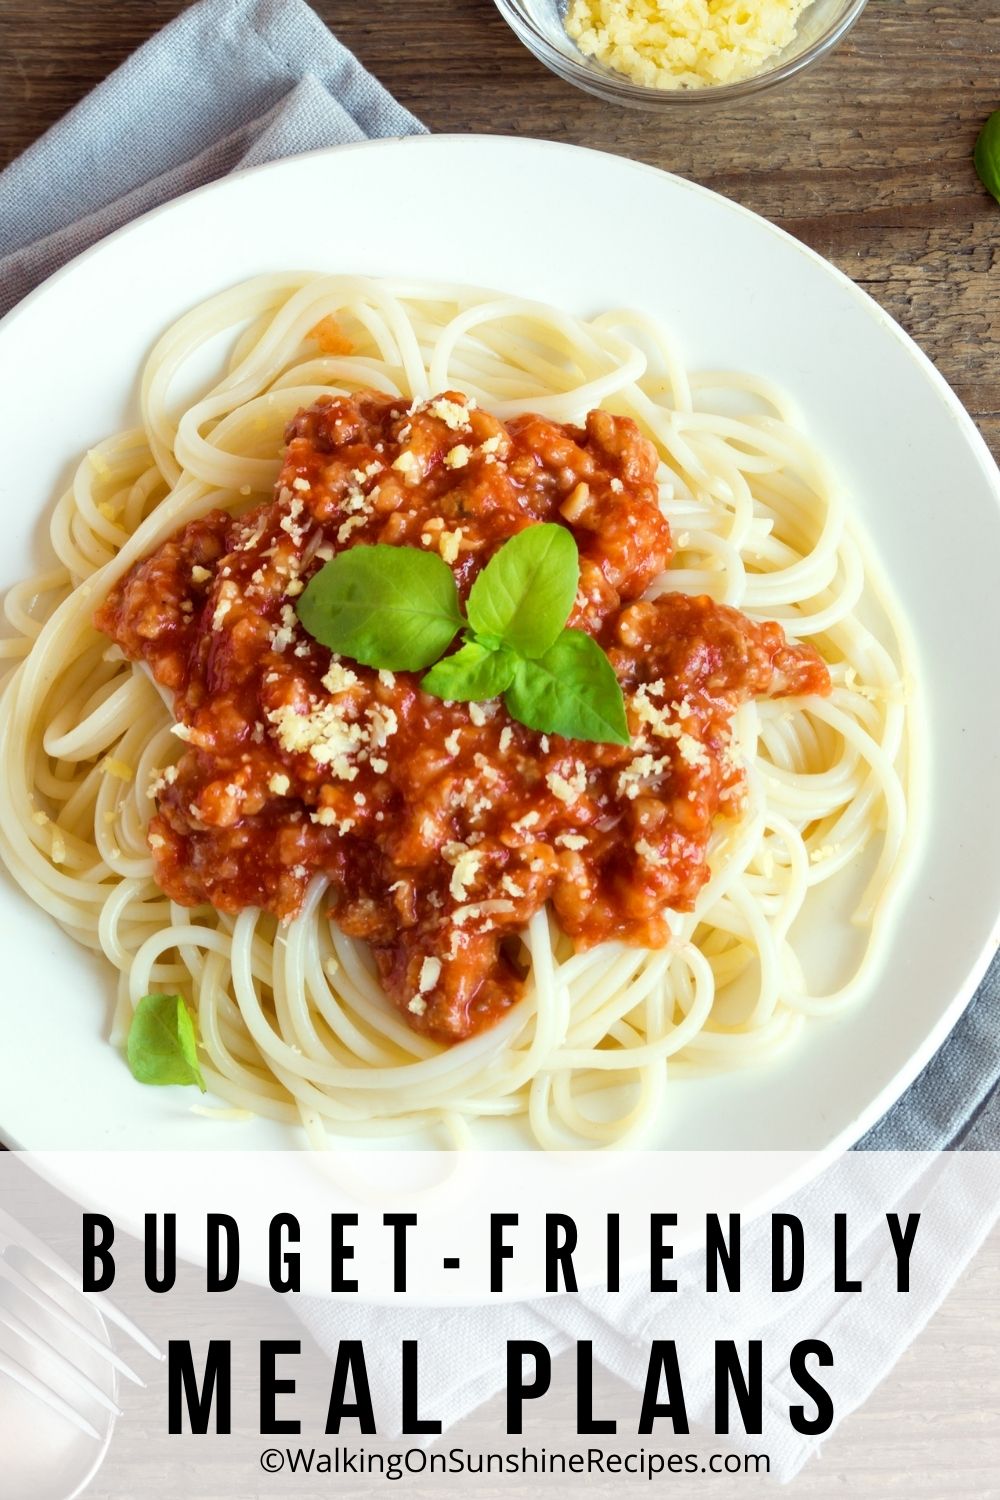 Spaghetti is a budget-friendly meal.